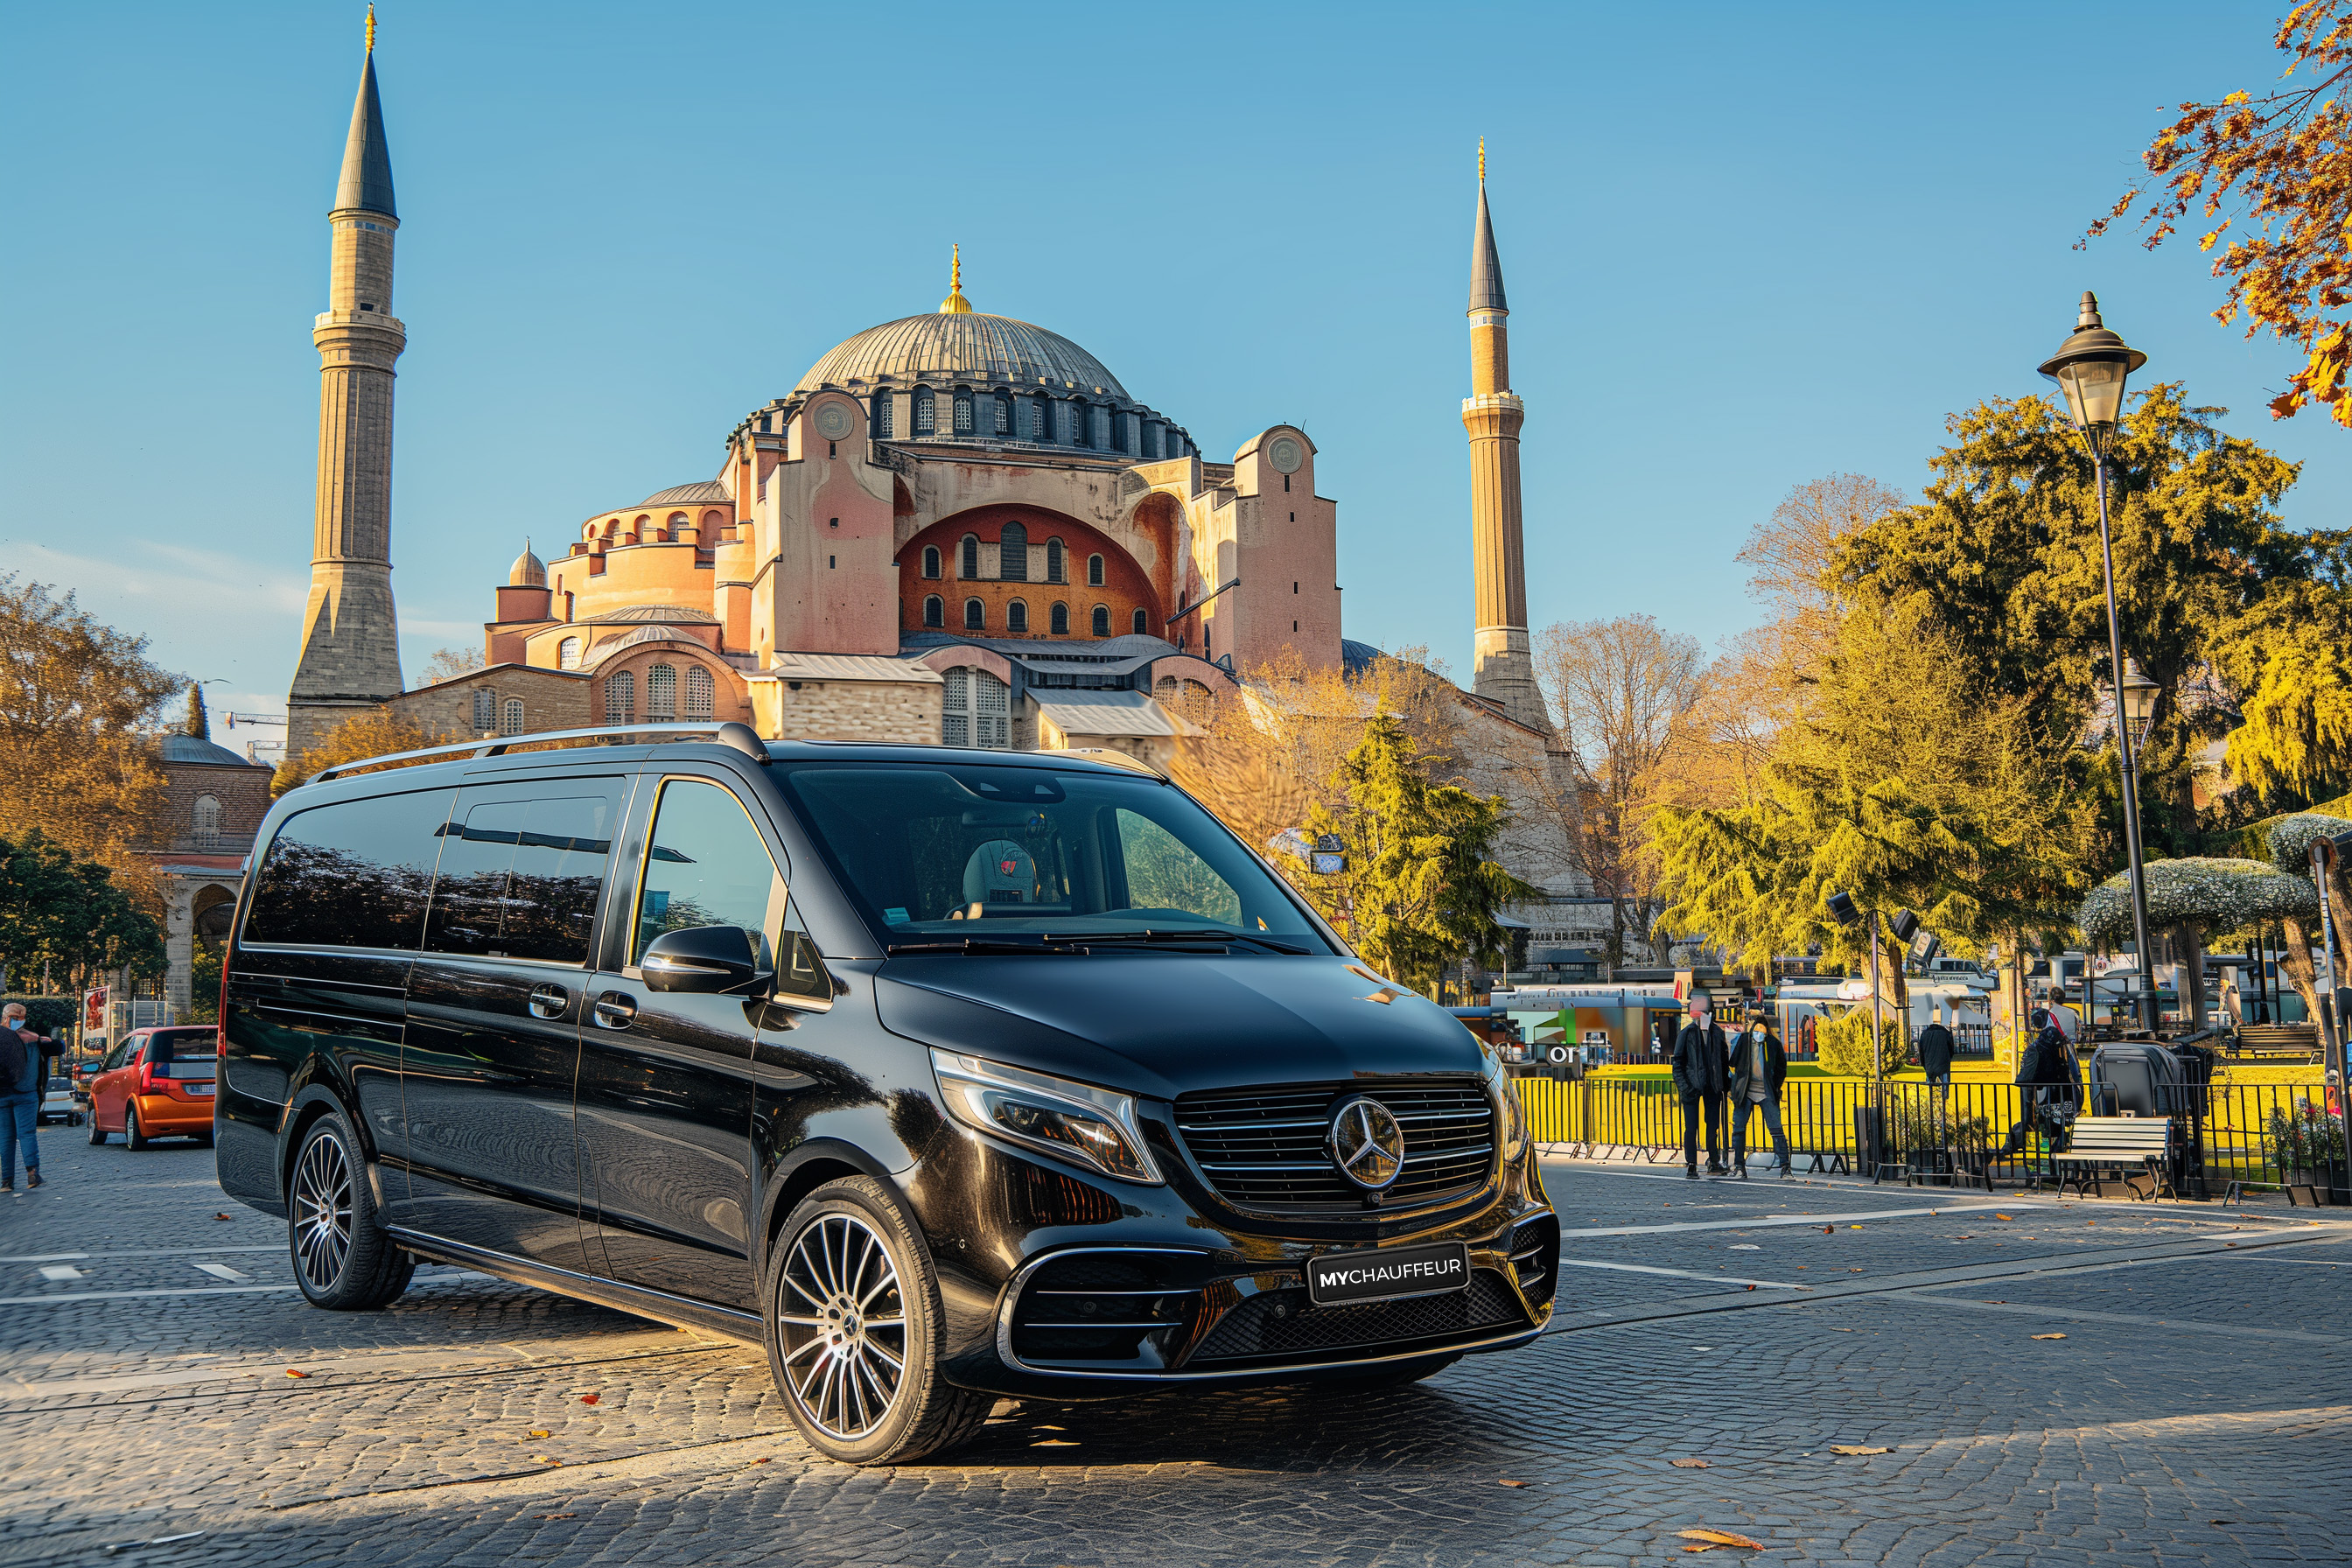 City tour in Istanbul with a luxurious Maybach limousine